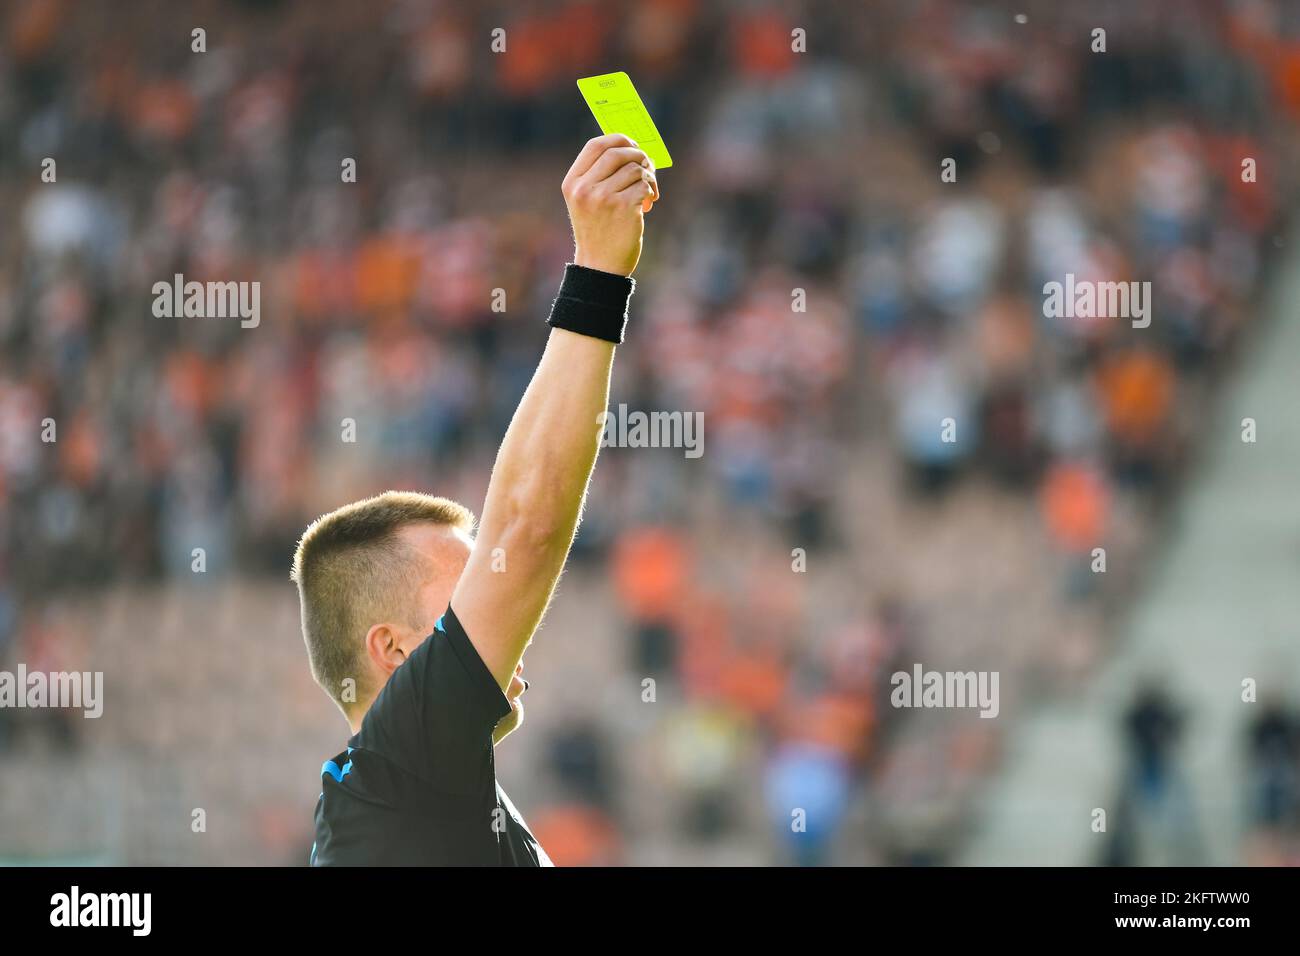 Referee shows yellow card during soccer match at the stadium Stock Photo